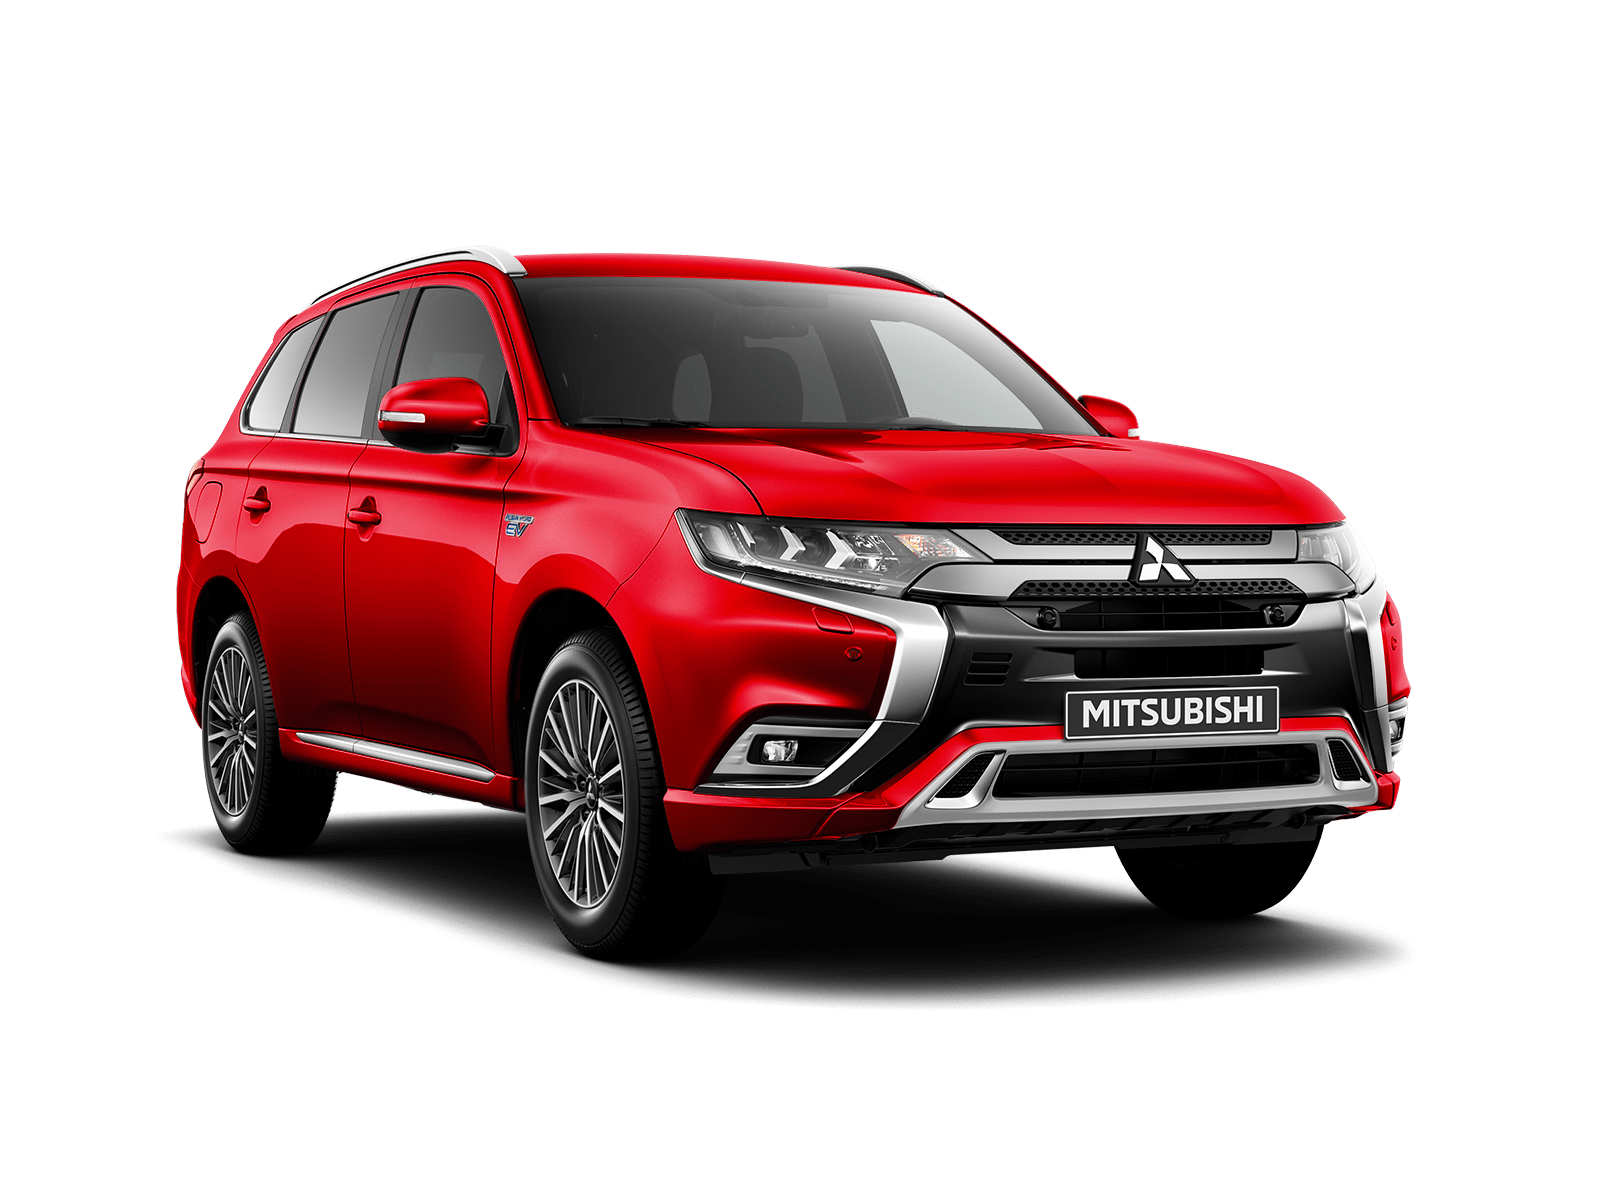 New Outlander PHEV - Electric & More